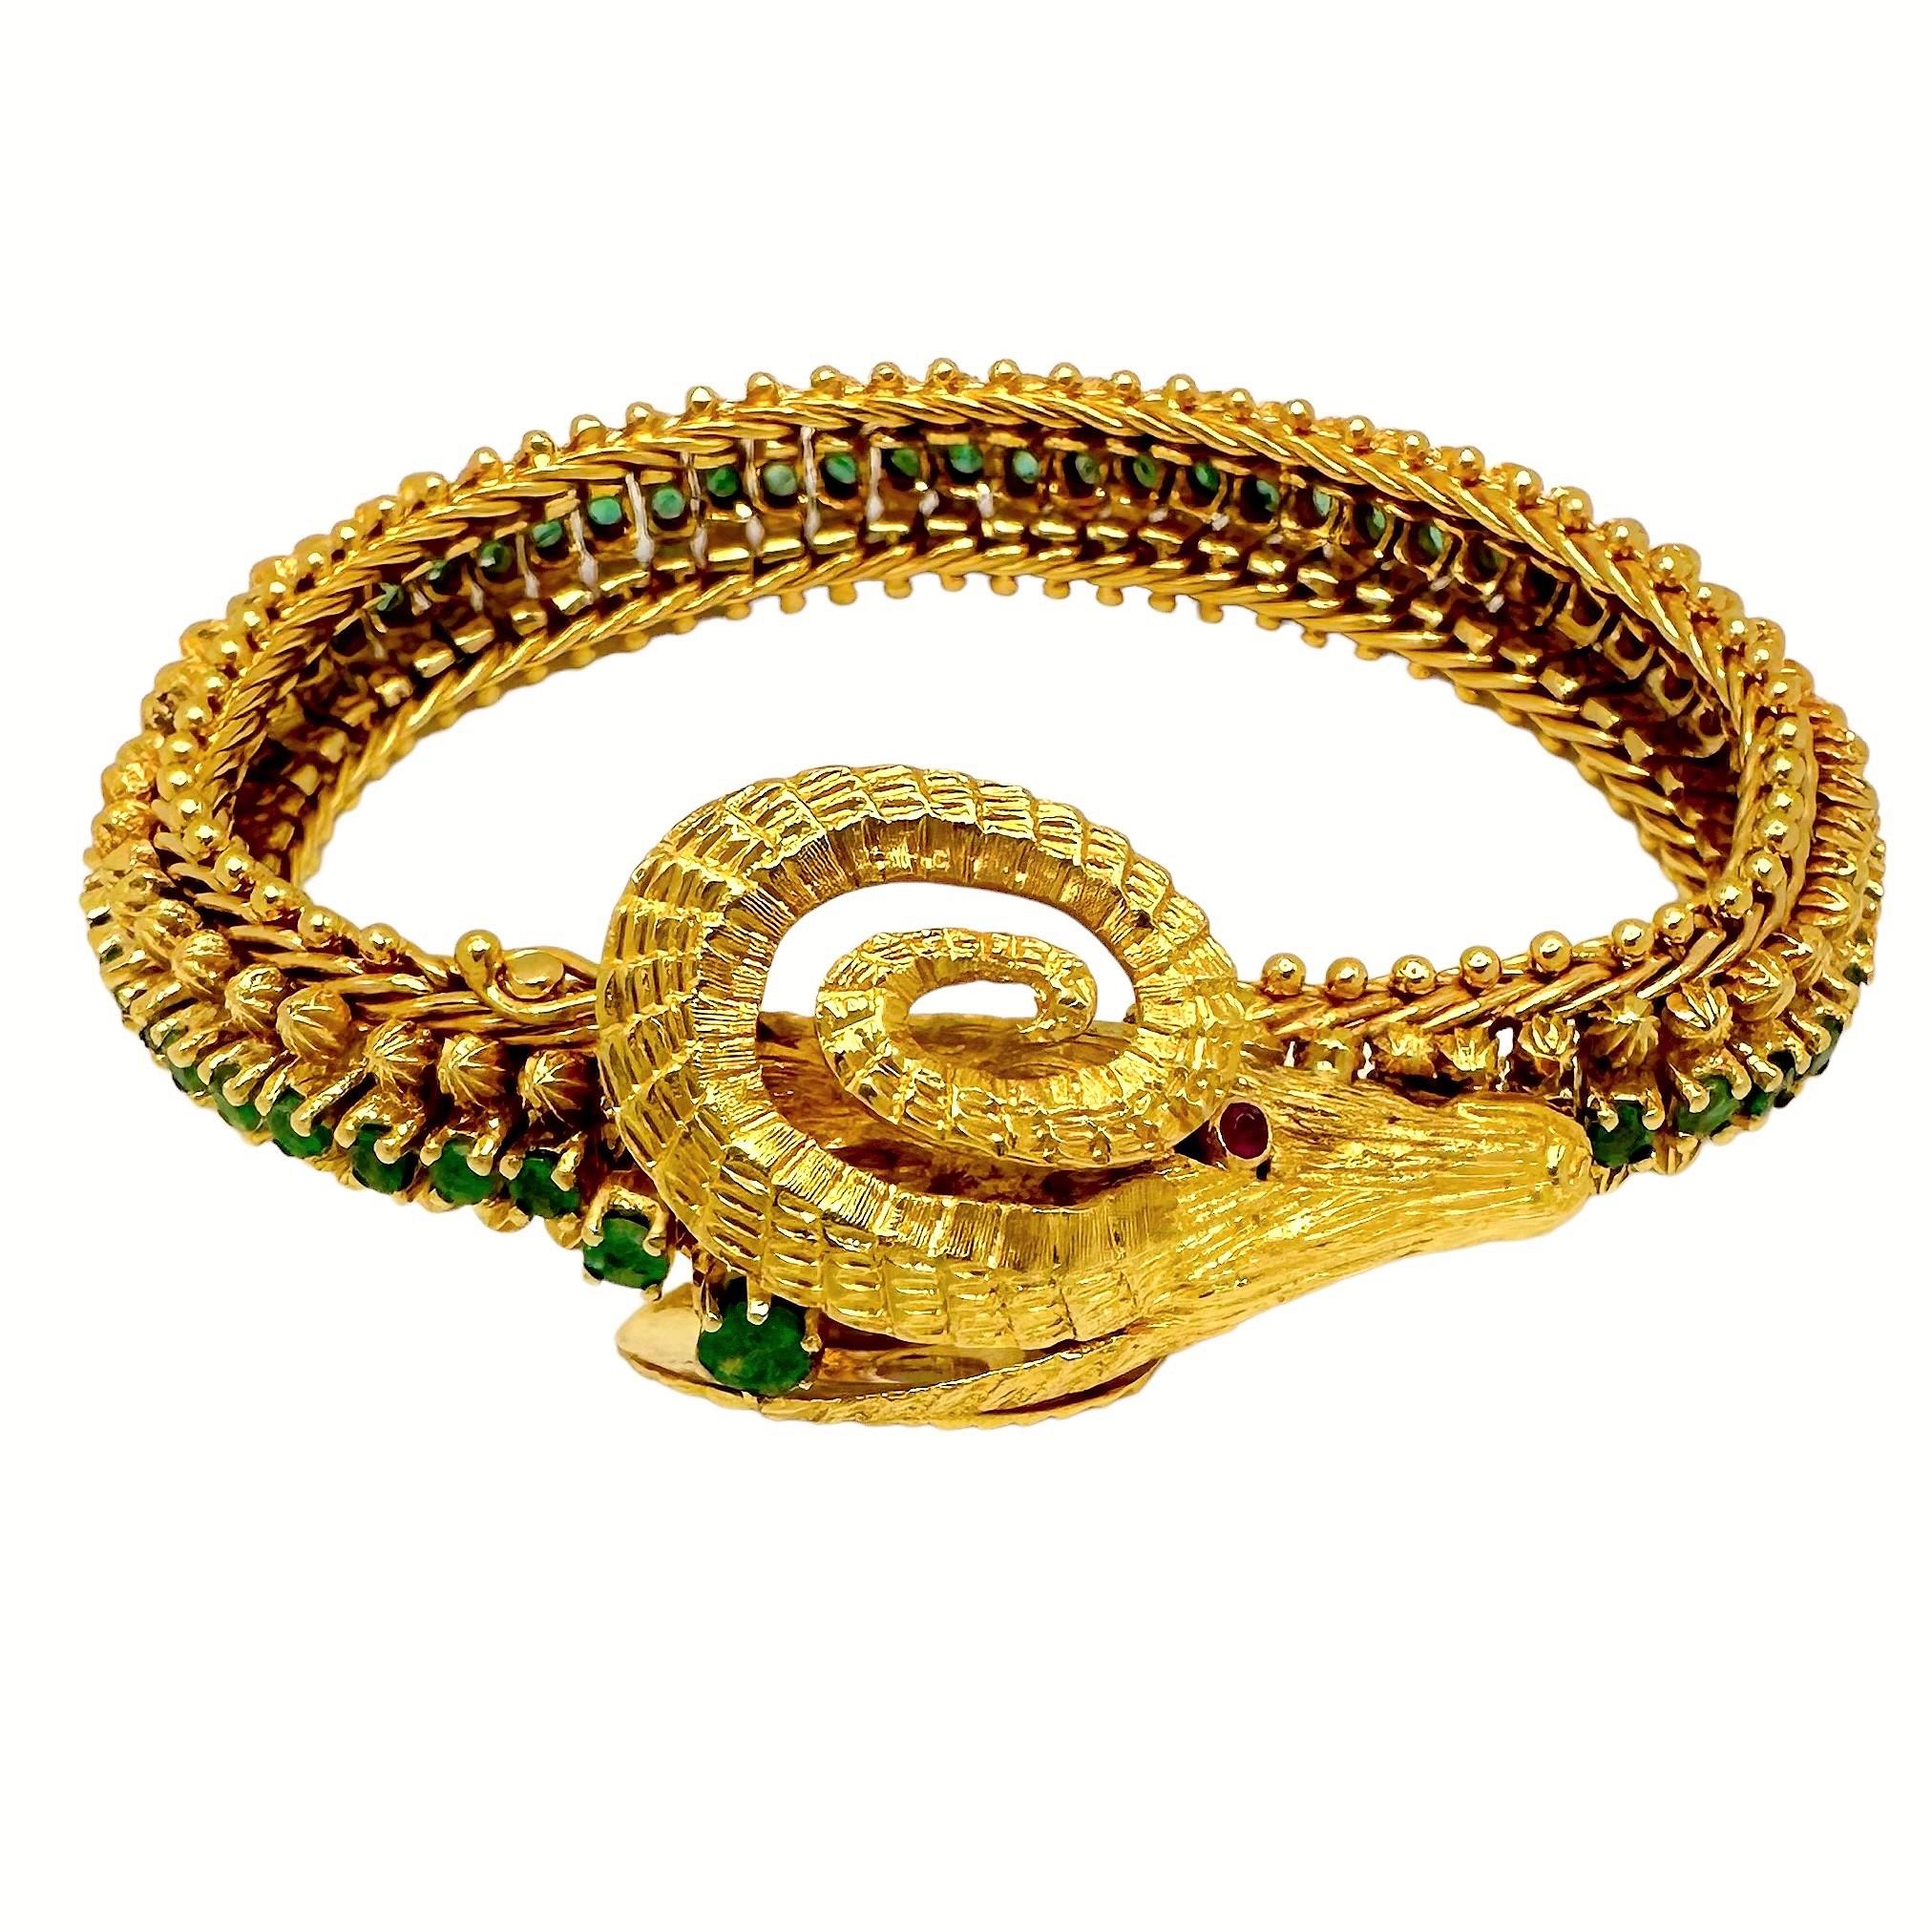 Highly regarded Greek jeweler Zolotas created this fanciful and unusual Rams head motif flexible bracelet. With a rich 24K gold wash, sultry ruby eyes, and a spine set entirely around with a single line of emeralds, this bracelet is a departure from